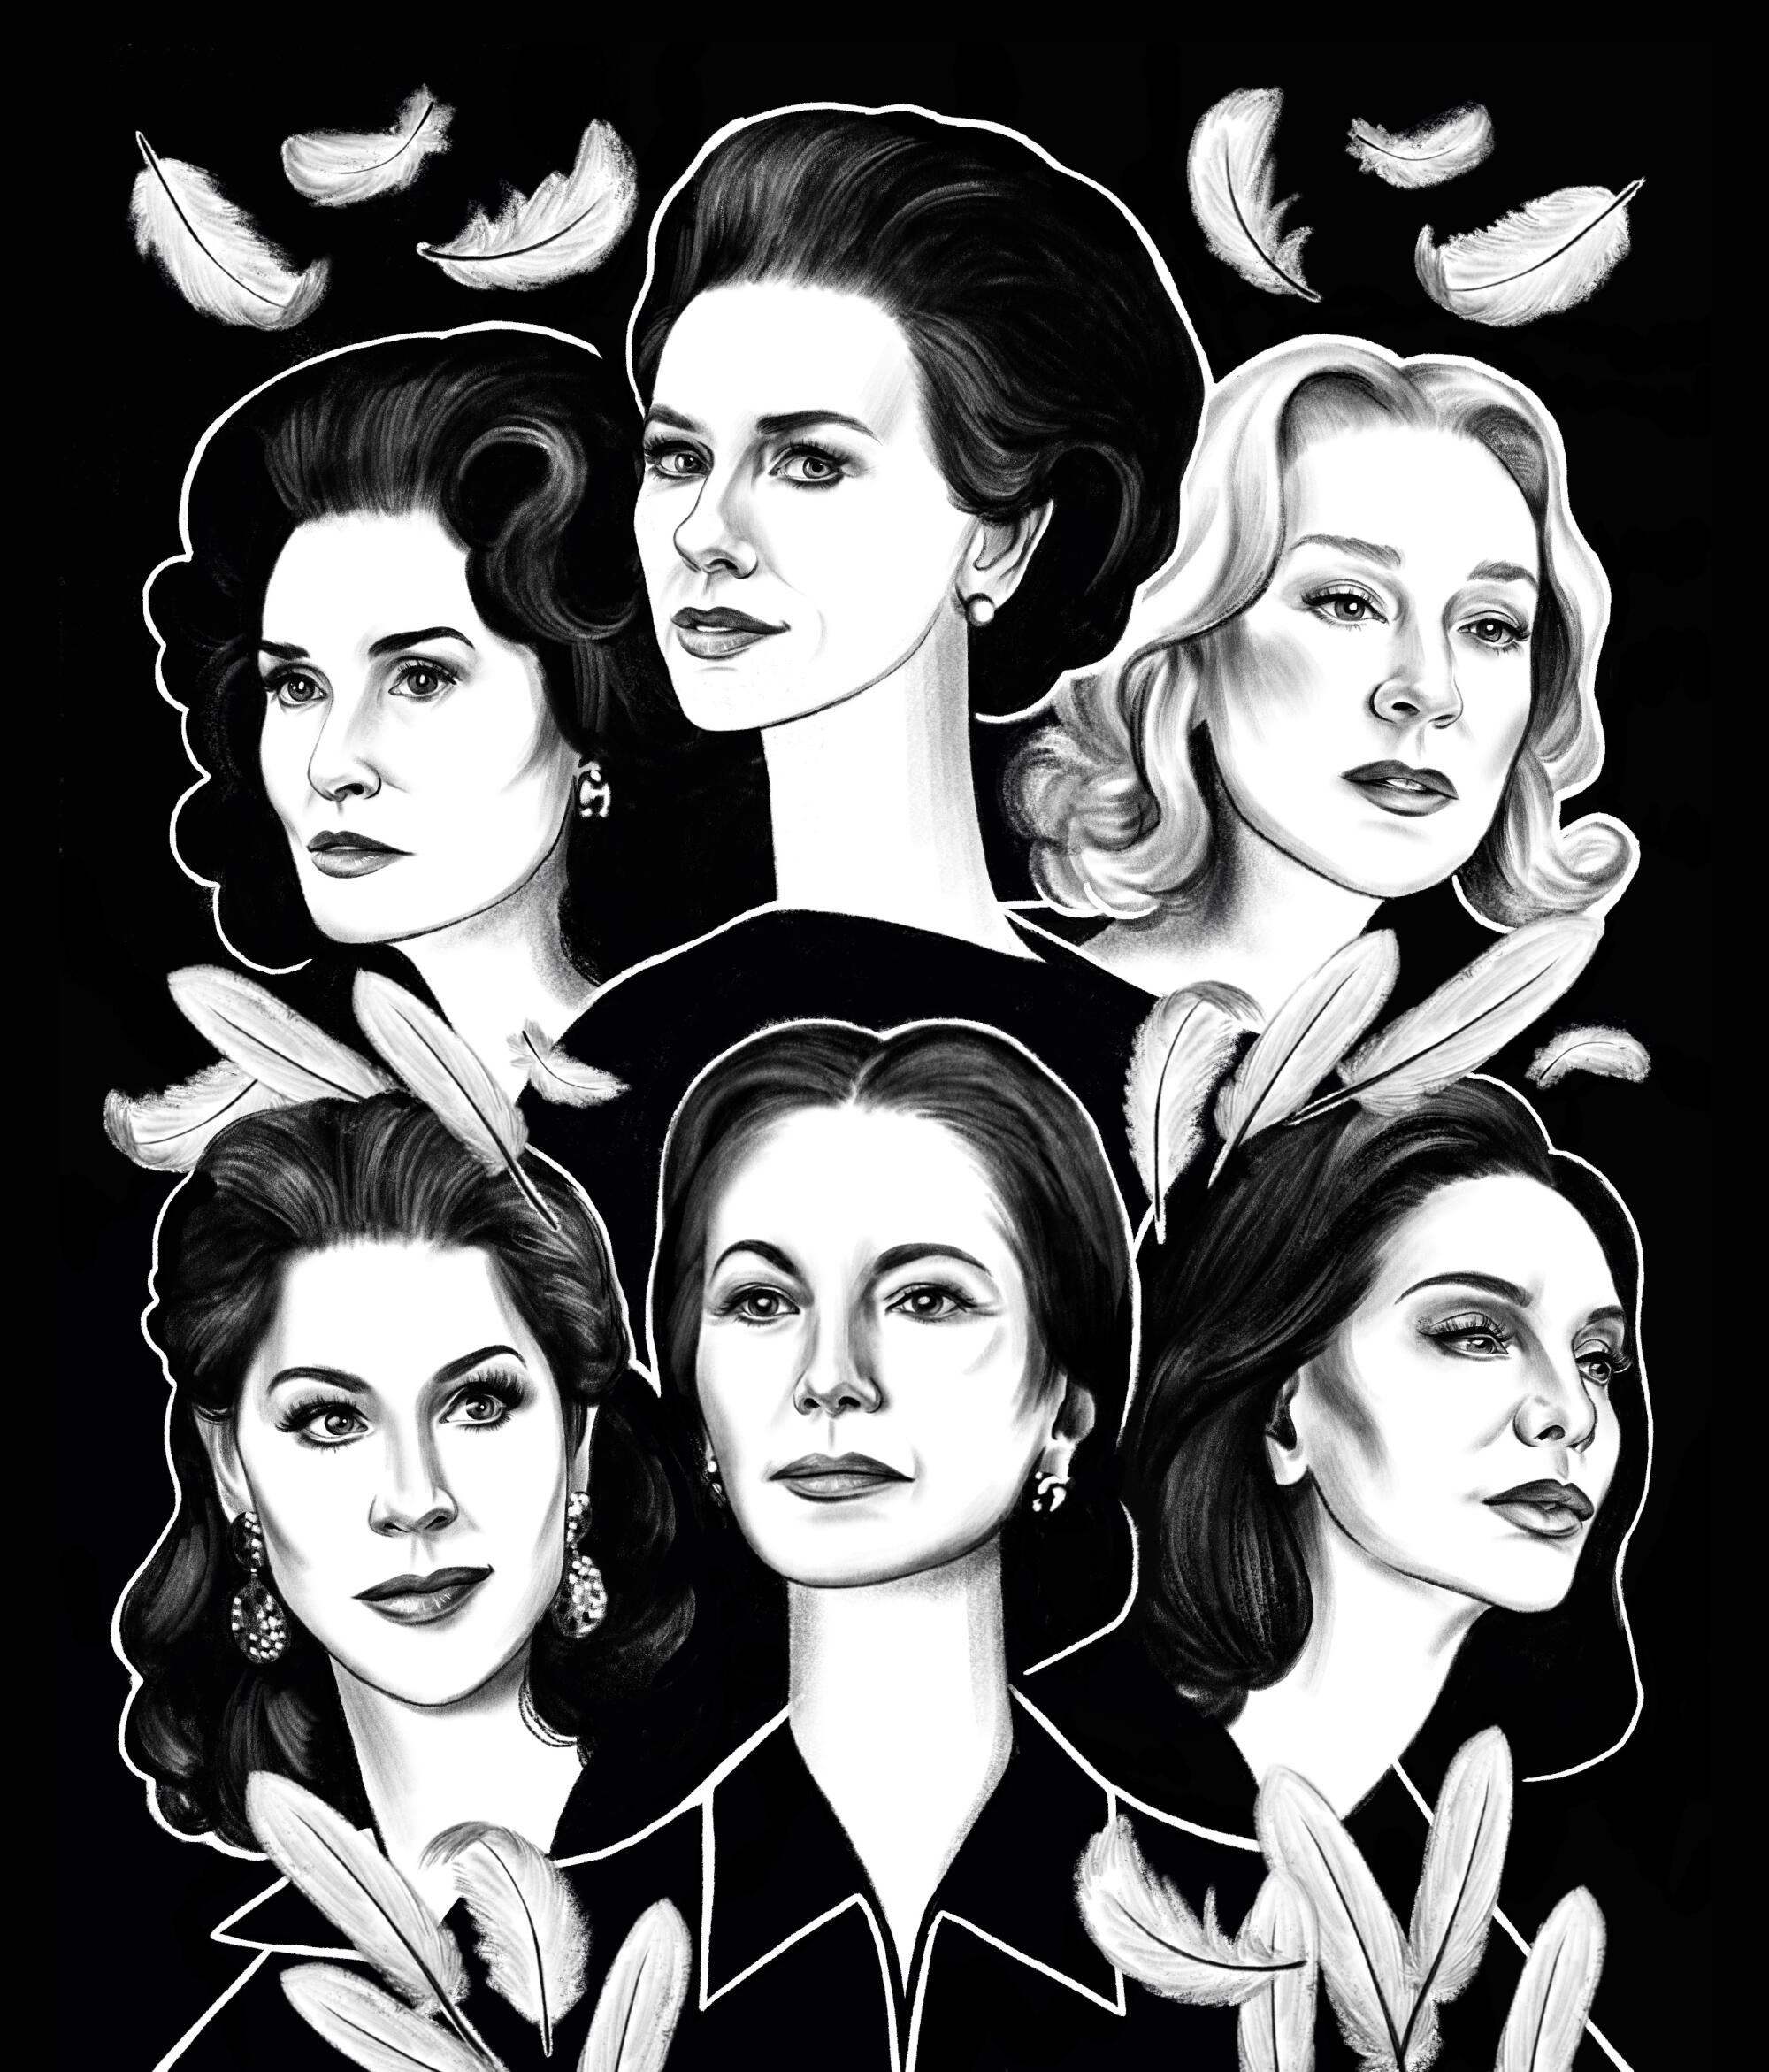 A black-and-white illustration of the women in "Feud."